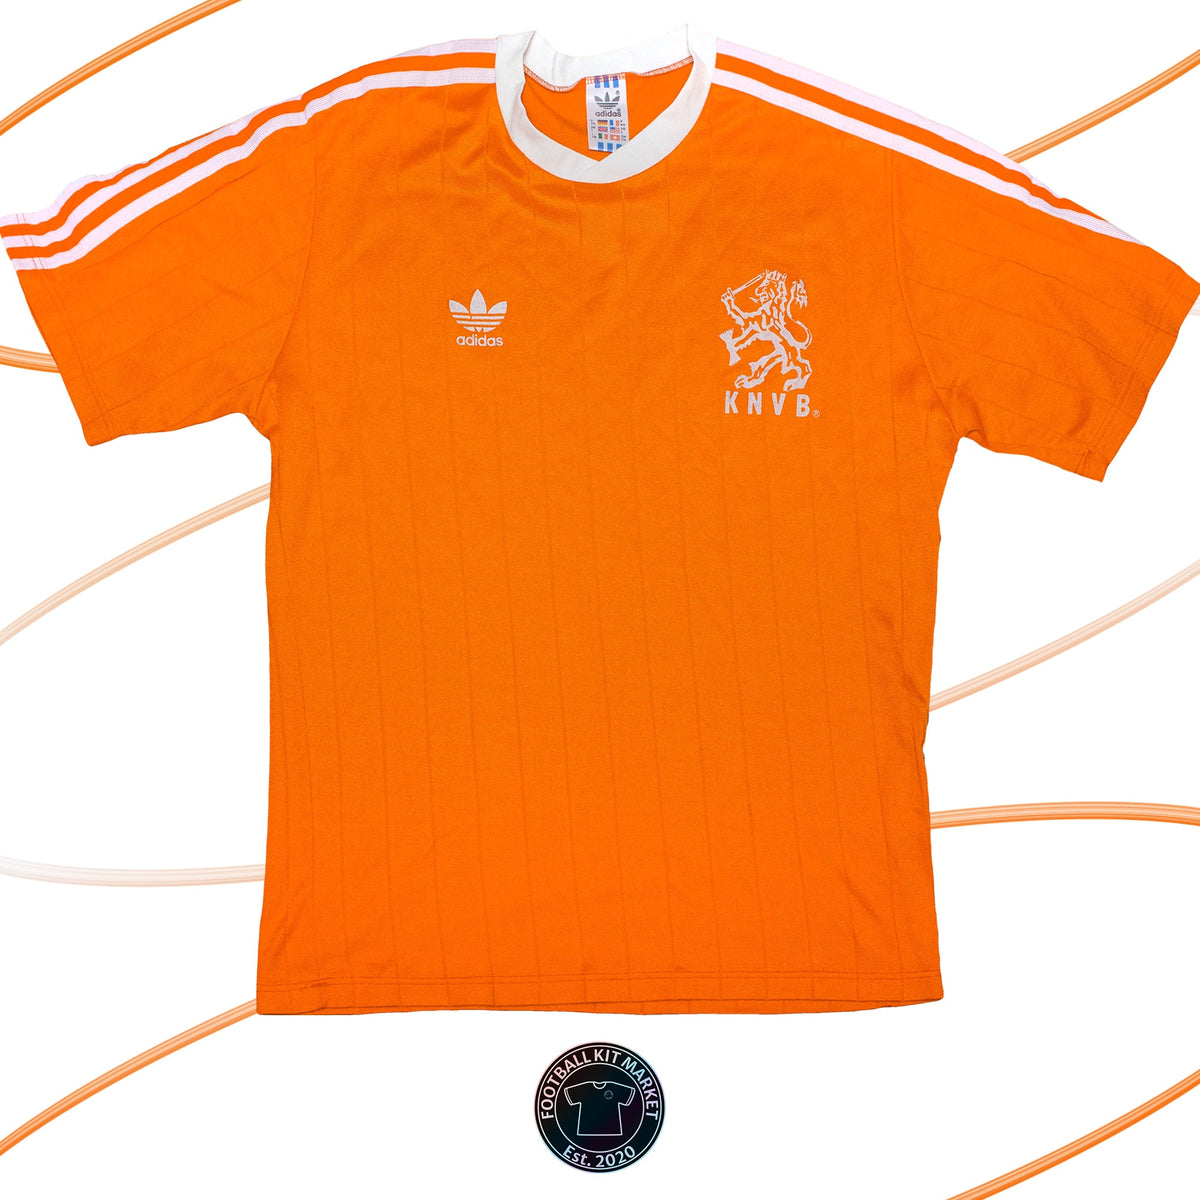 Genuine NETHERLANDS Home Shirt (1982-1983) - ADIDAS (L) - Product Image from Football Kit Market